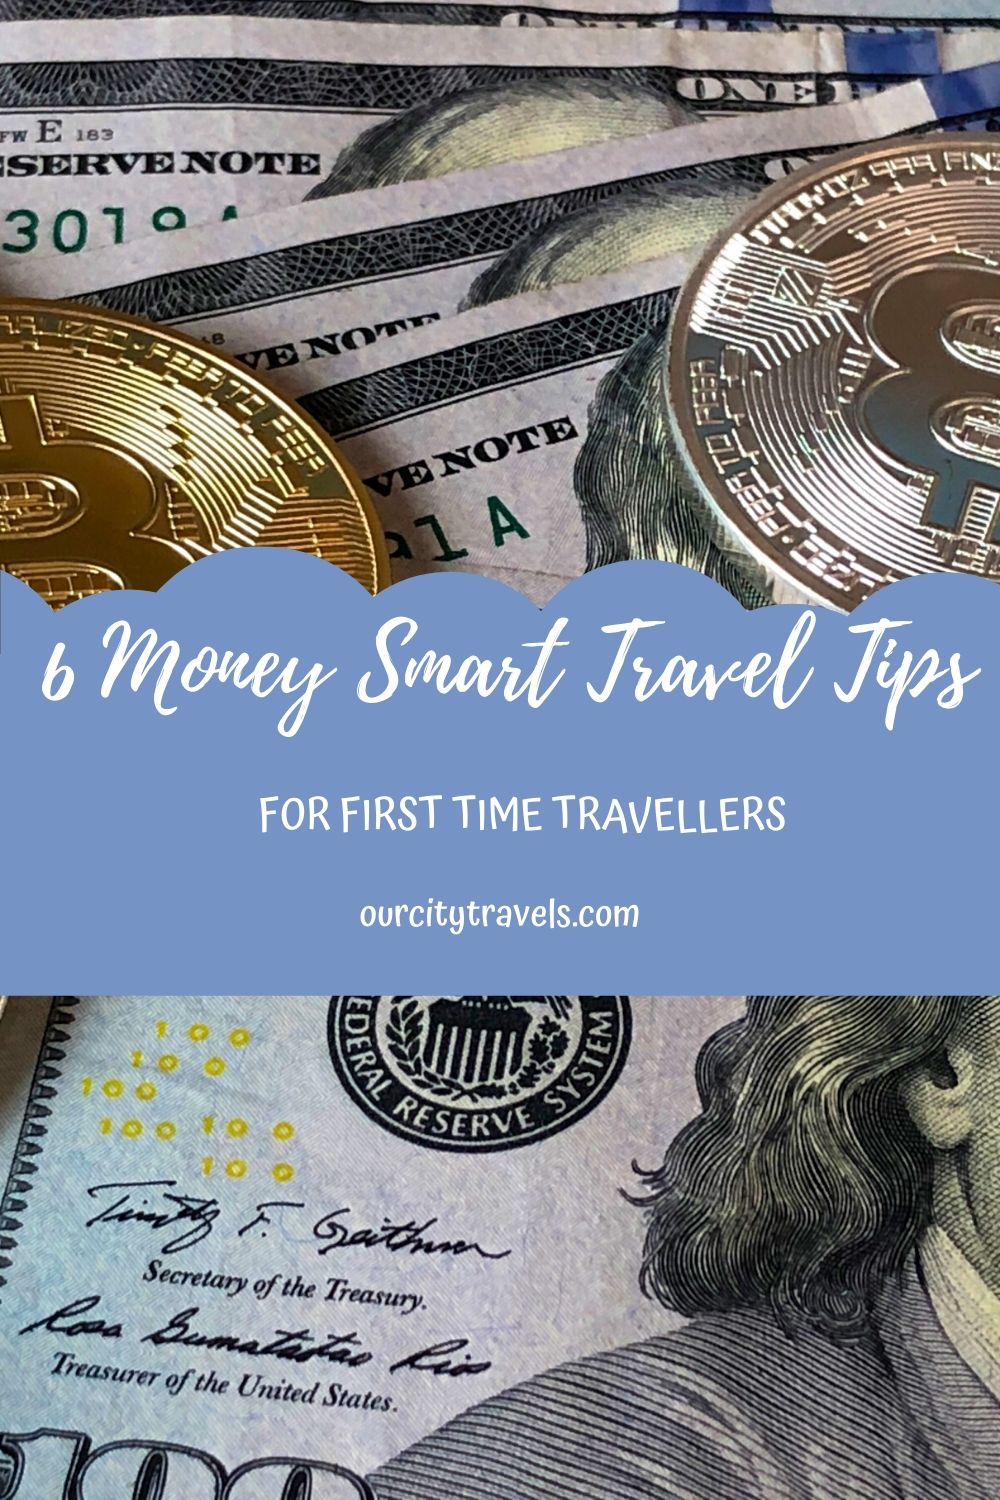 Money Smart Travel Tips for First Time Travelers - 1. Budget Wisely 2. Learn About Exchange Rates 3. Airport Money Bureaus Aren't Always the Best 4. Be Cash Ready 5. ATM Fees and Credit Card Transaction Fees